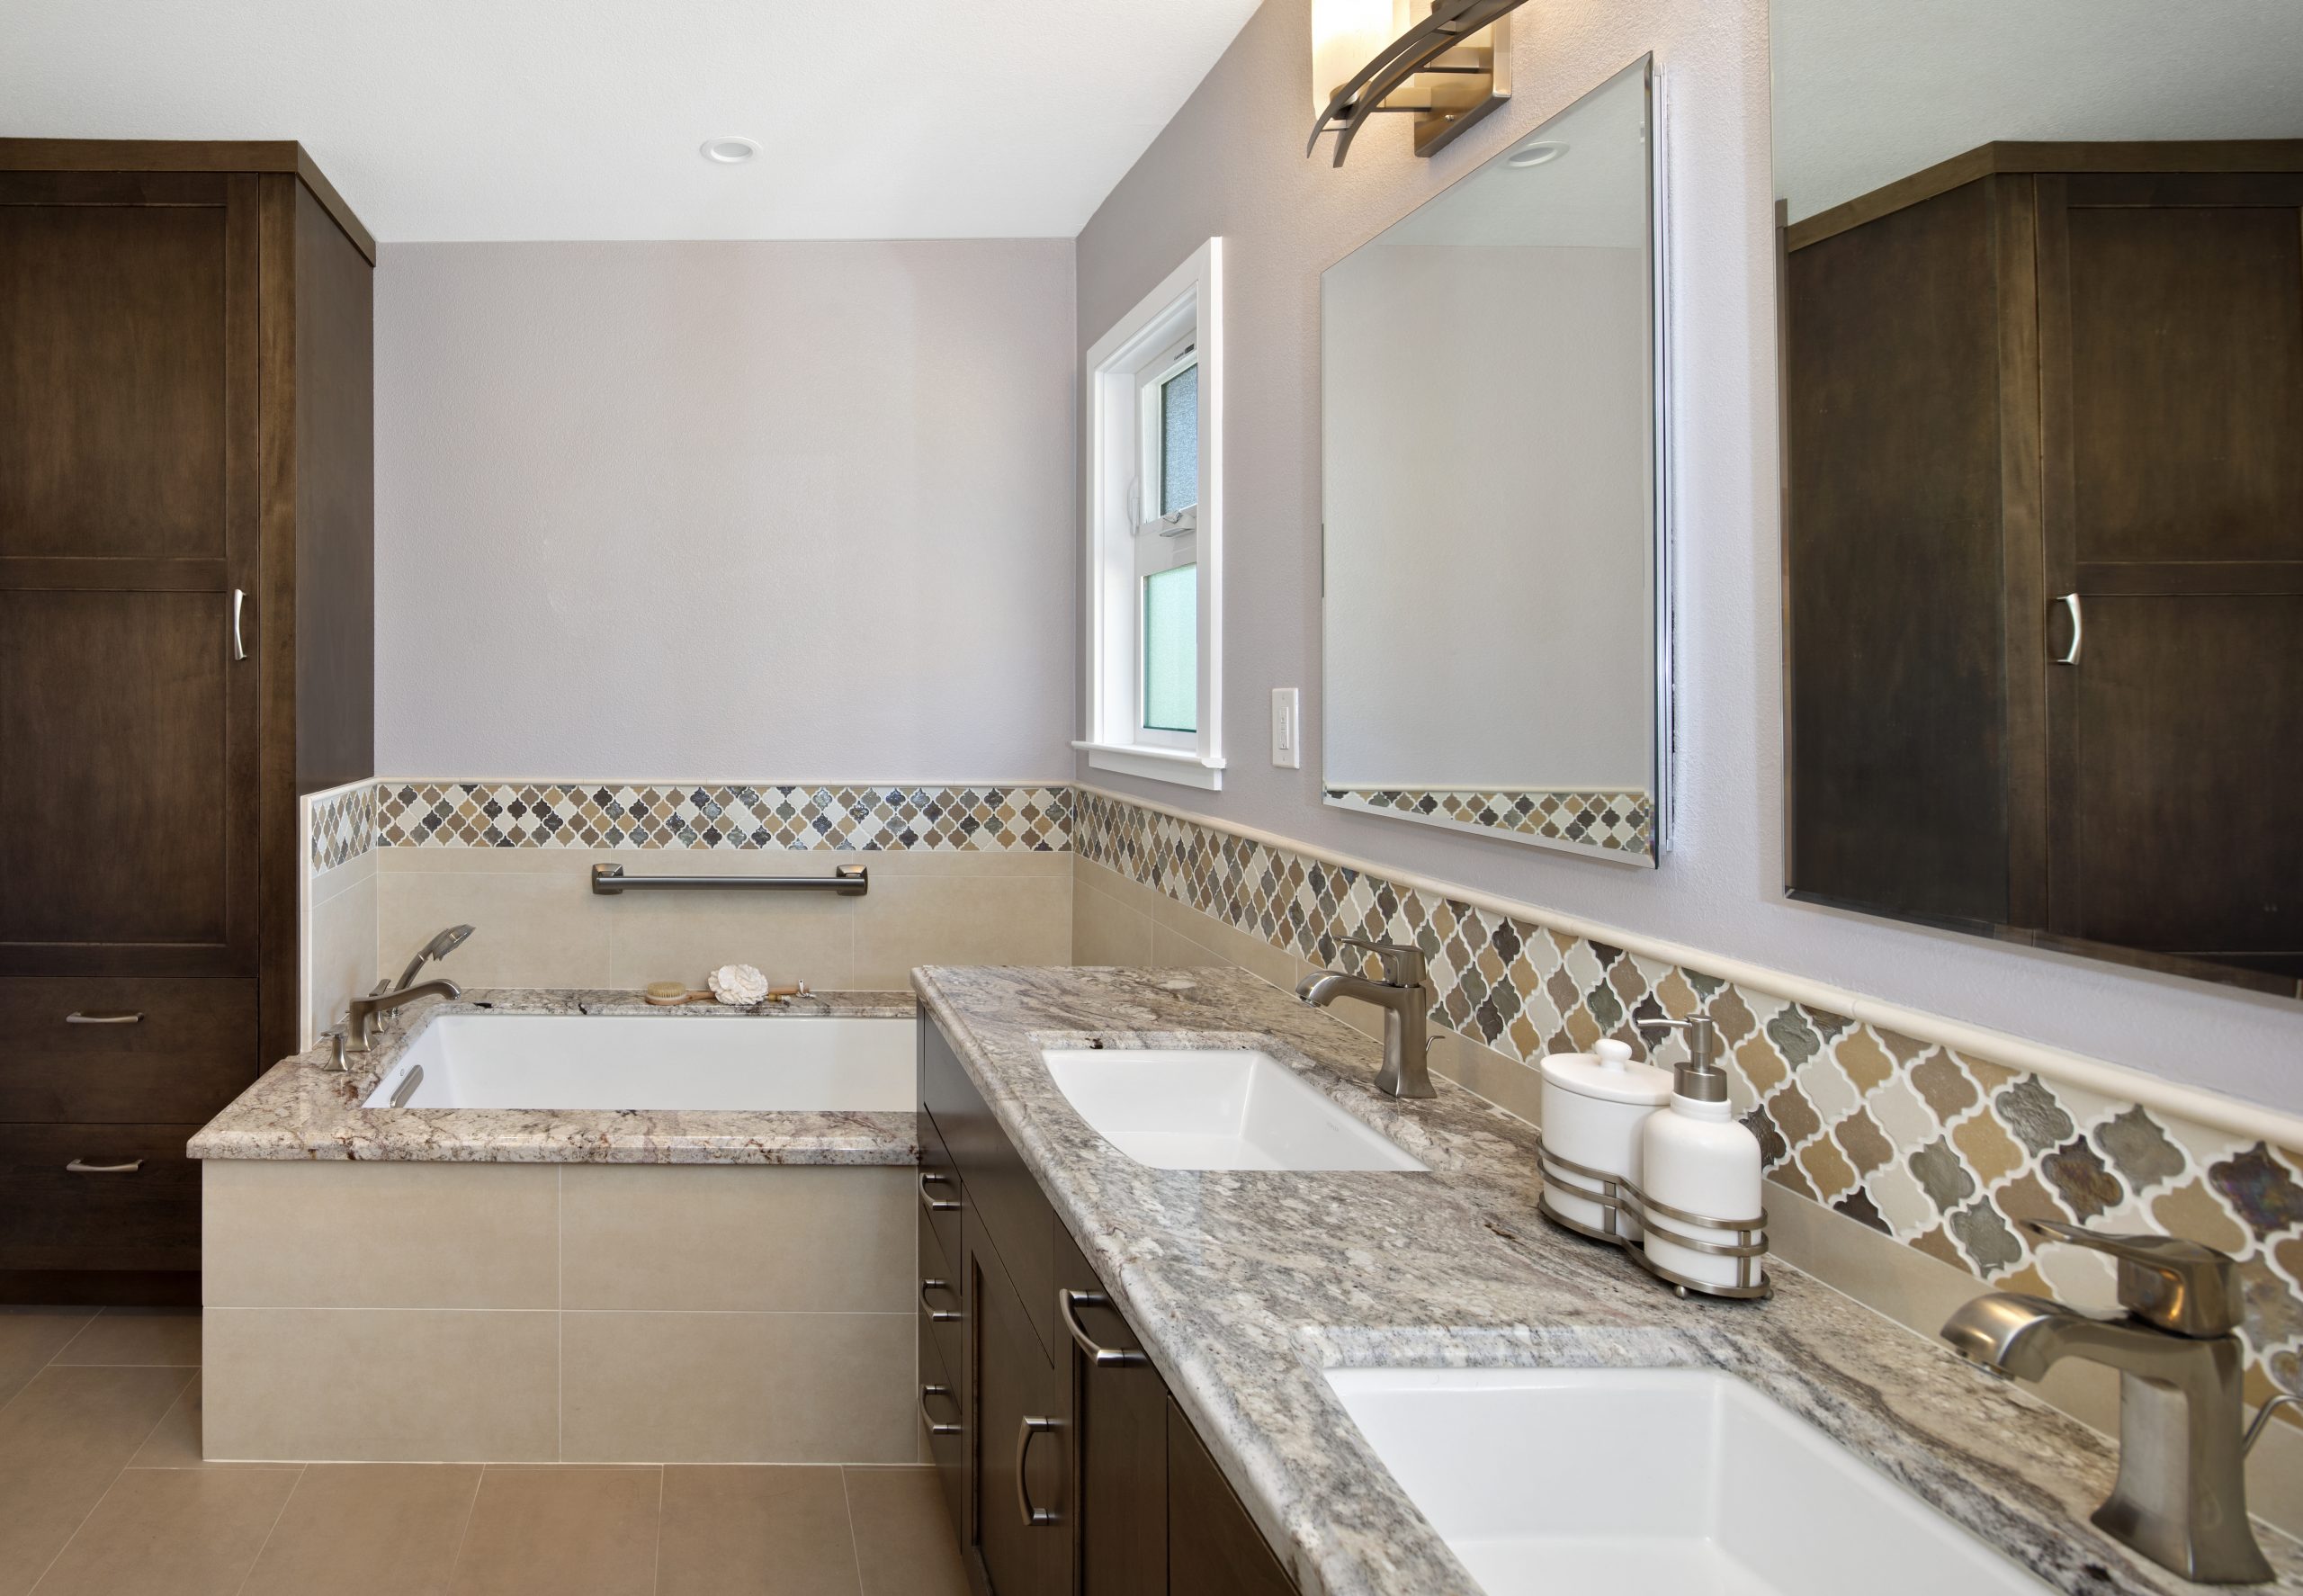 A bathroom with granite counter tops and a granite edged bathtub.